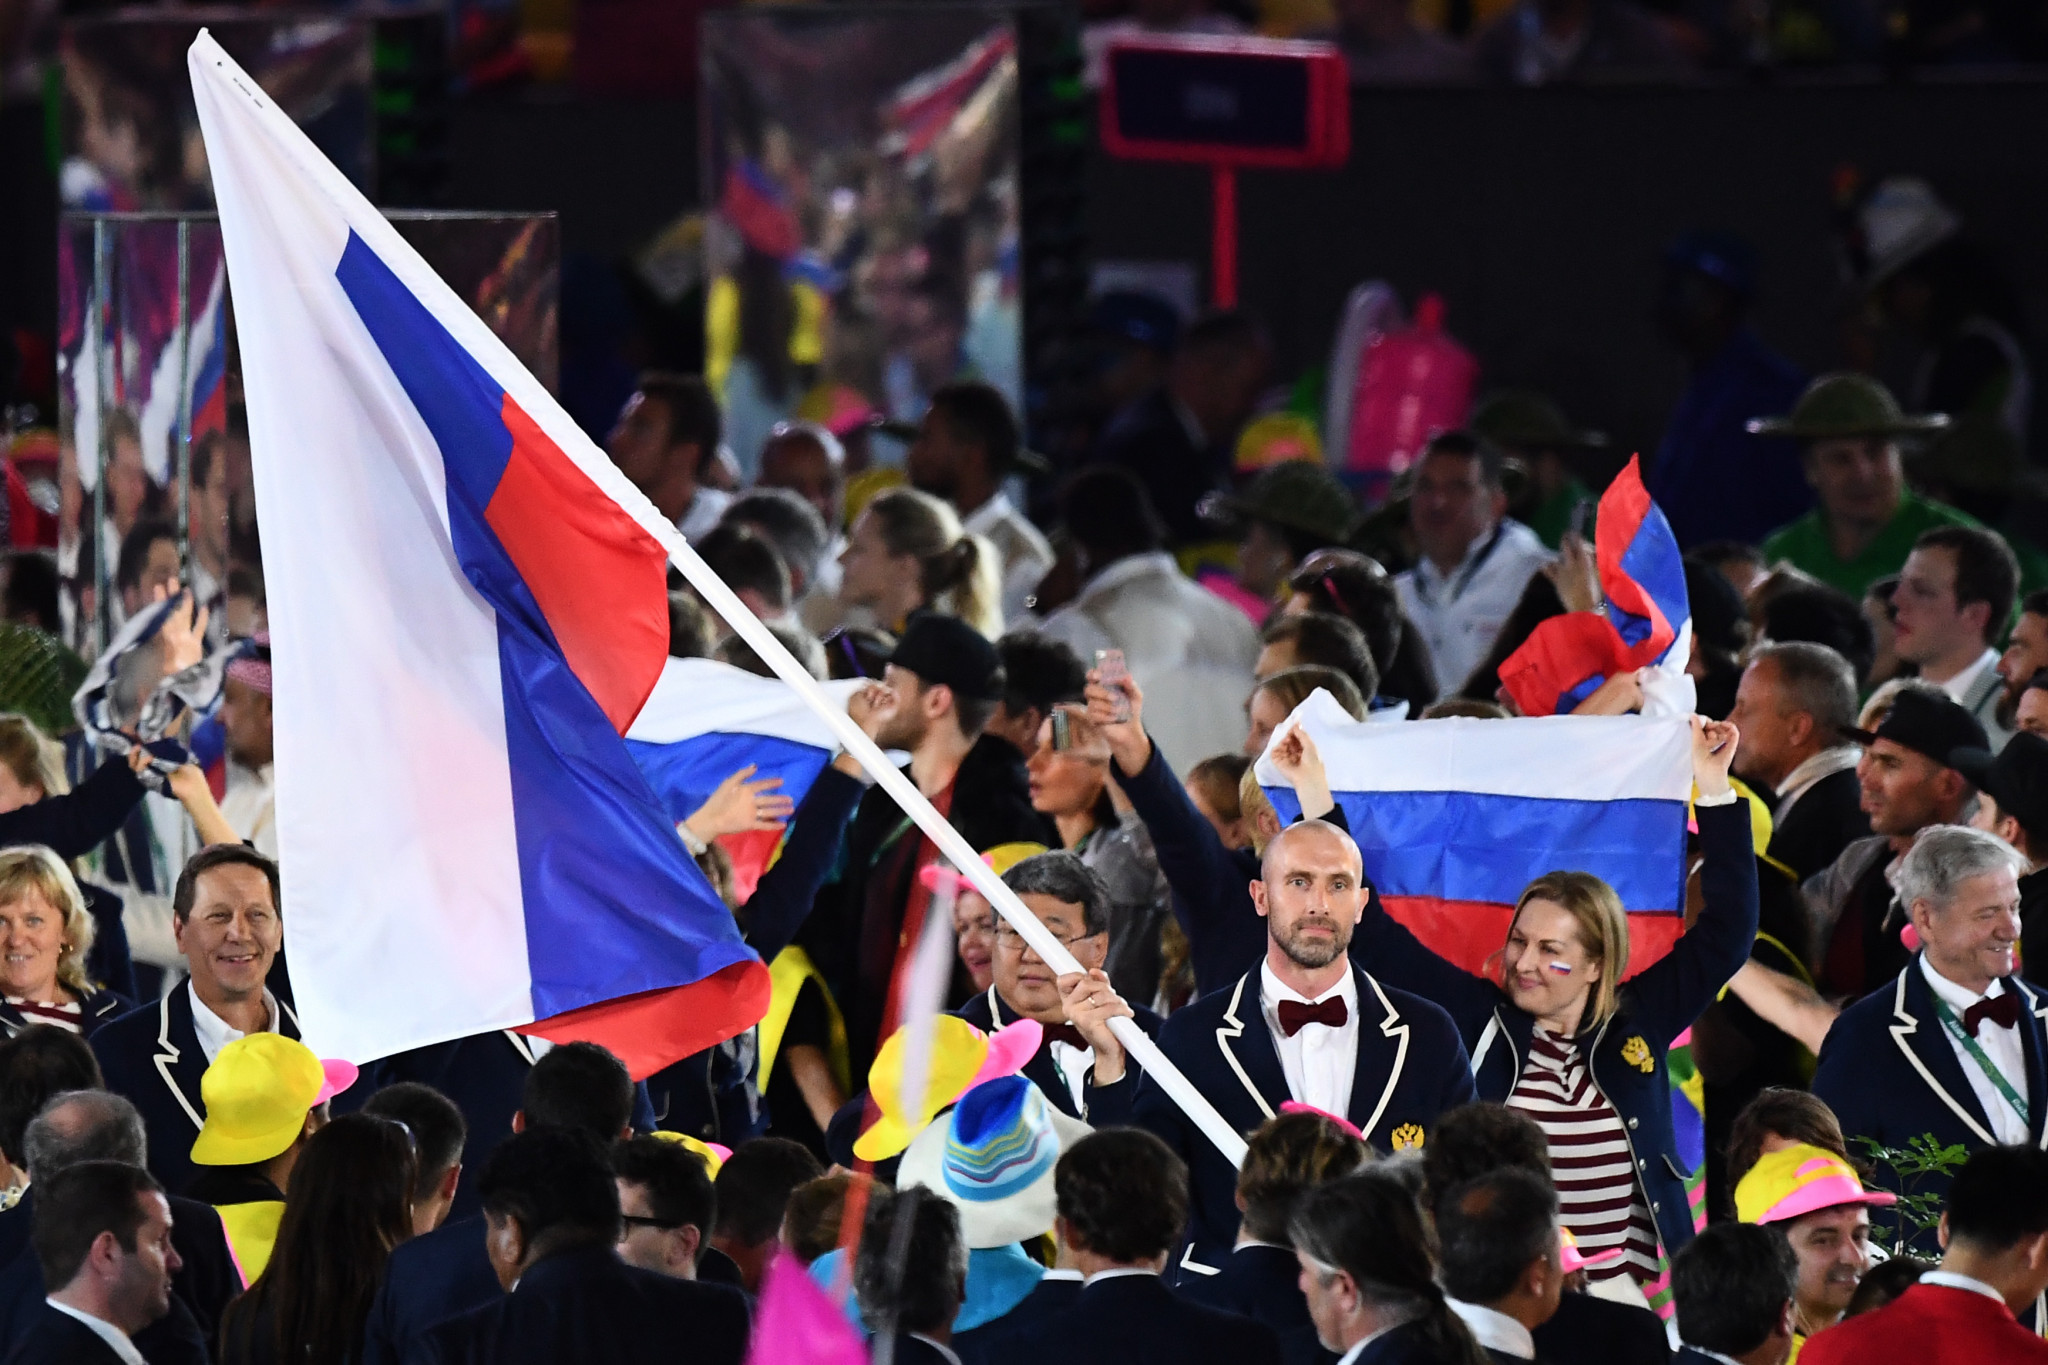 Russia's flag will be banned from major events for four years if CAS upholds WADA's decision ©Getty Images